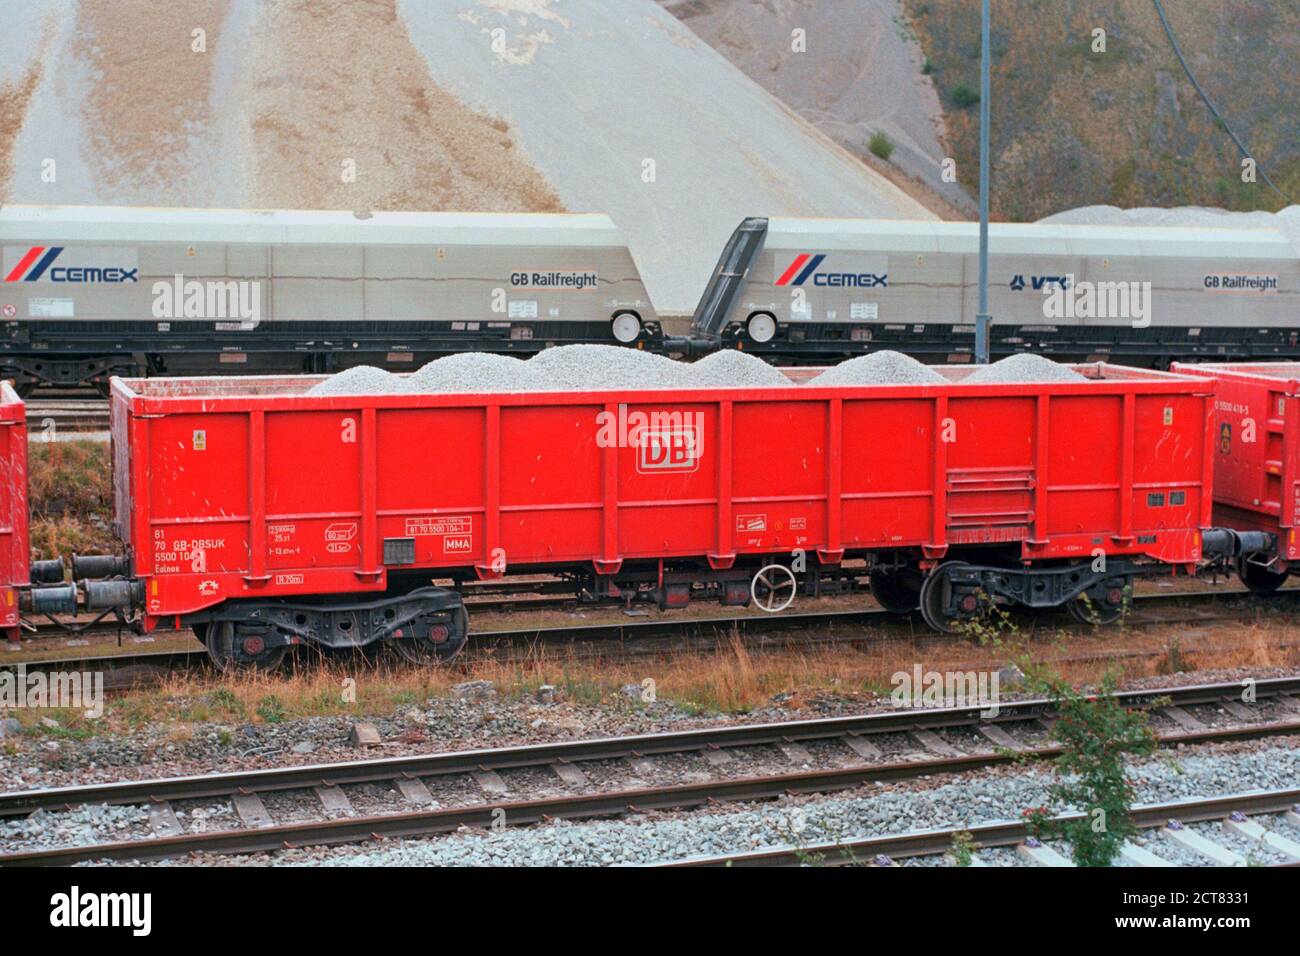 Buxton, UK - 16 September 2020: The DB (Deutsche Bahn) and GB Railfreight wagons for carrying stone at Peak Dale railway yard. Stock Photo